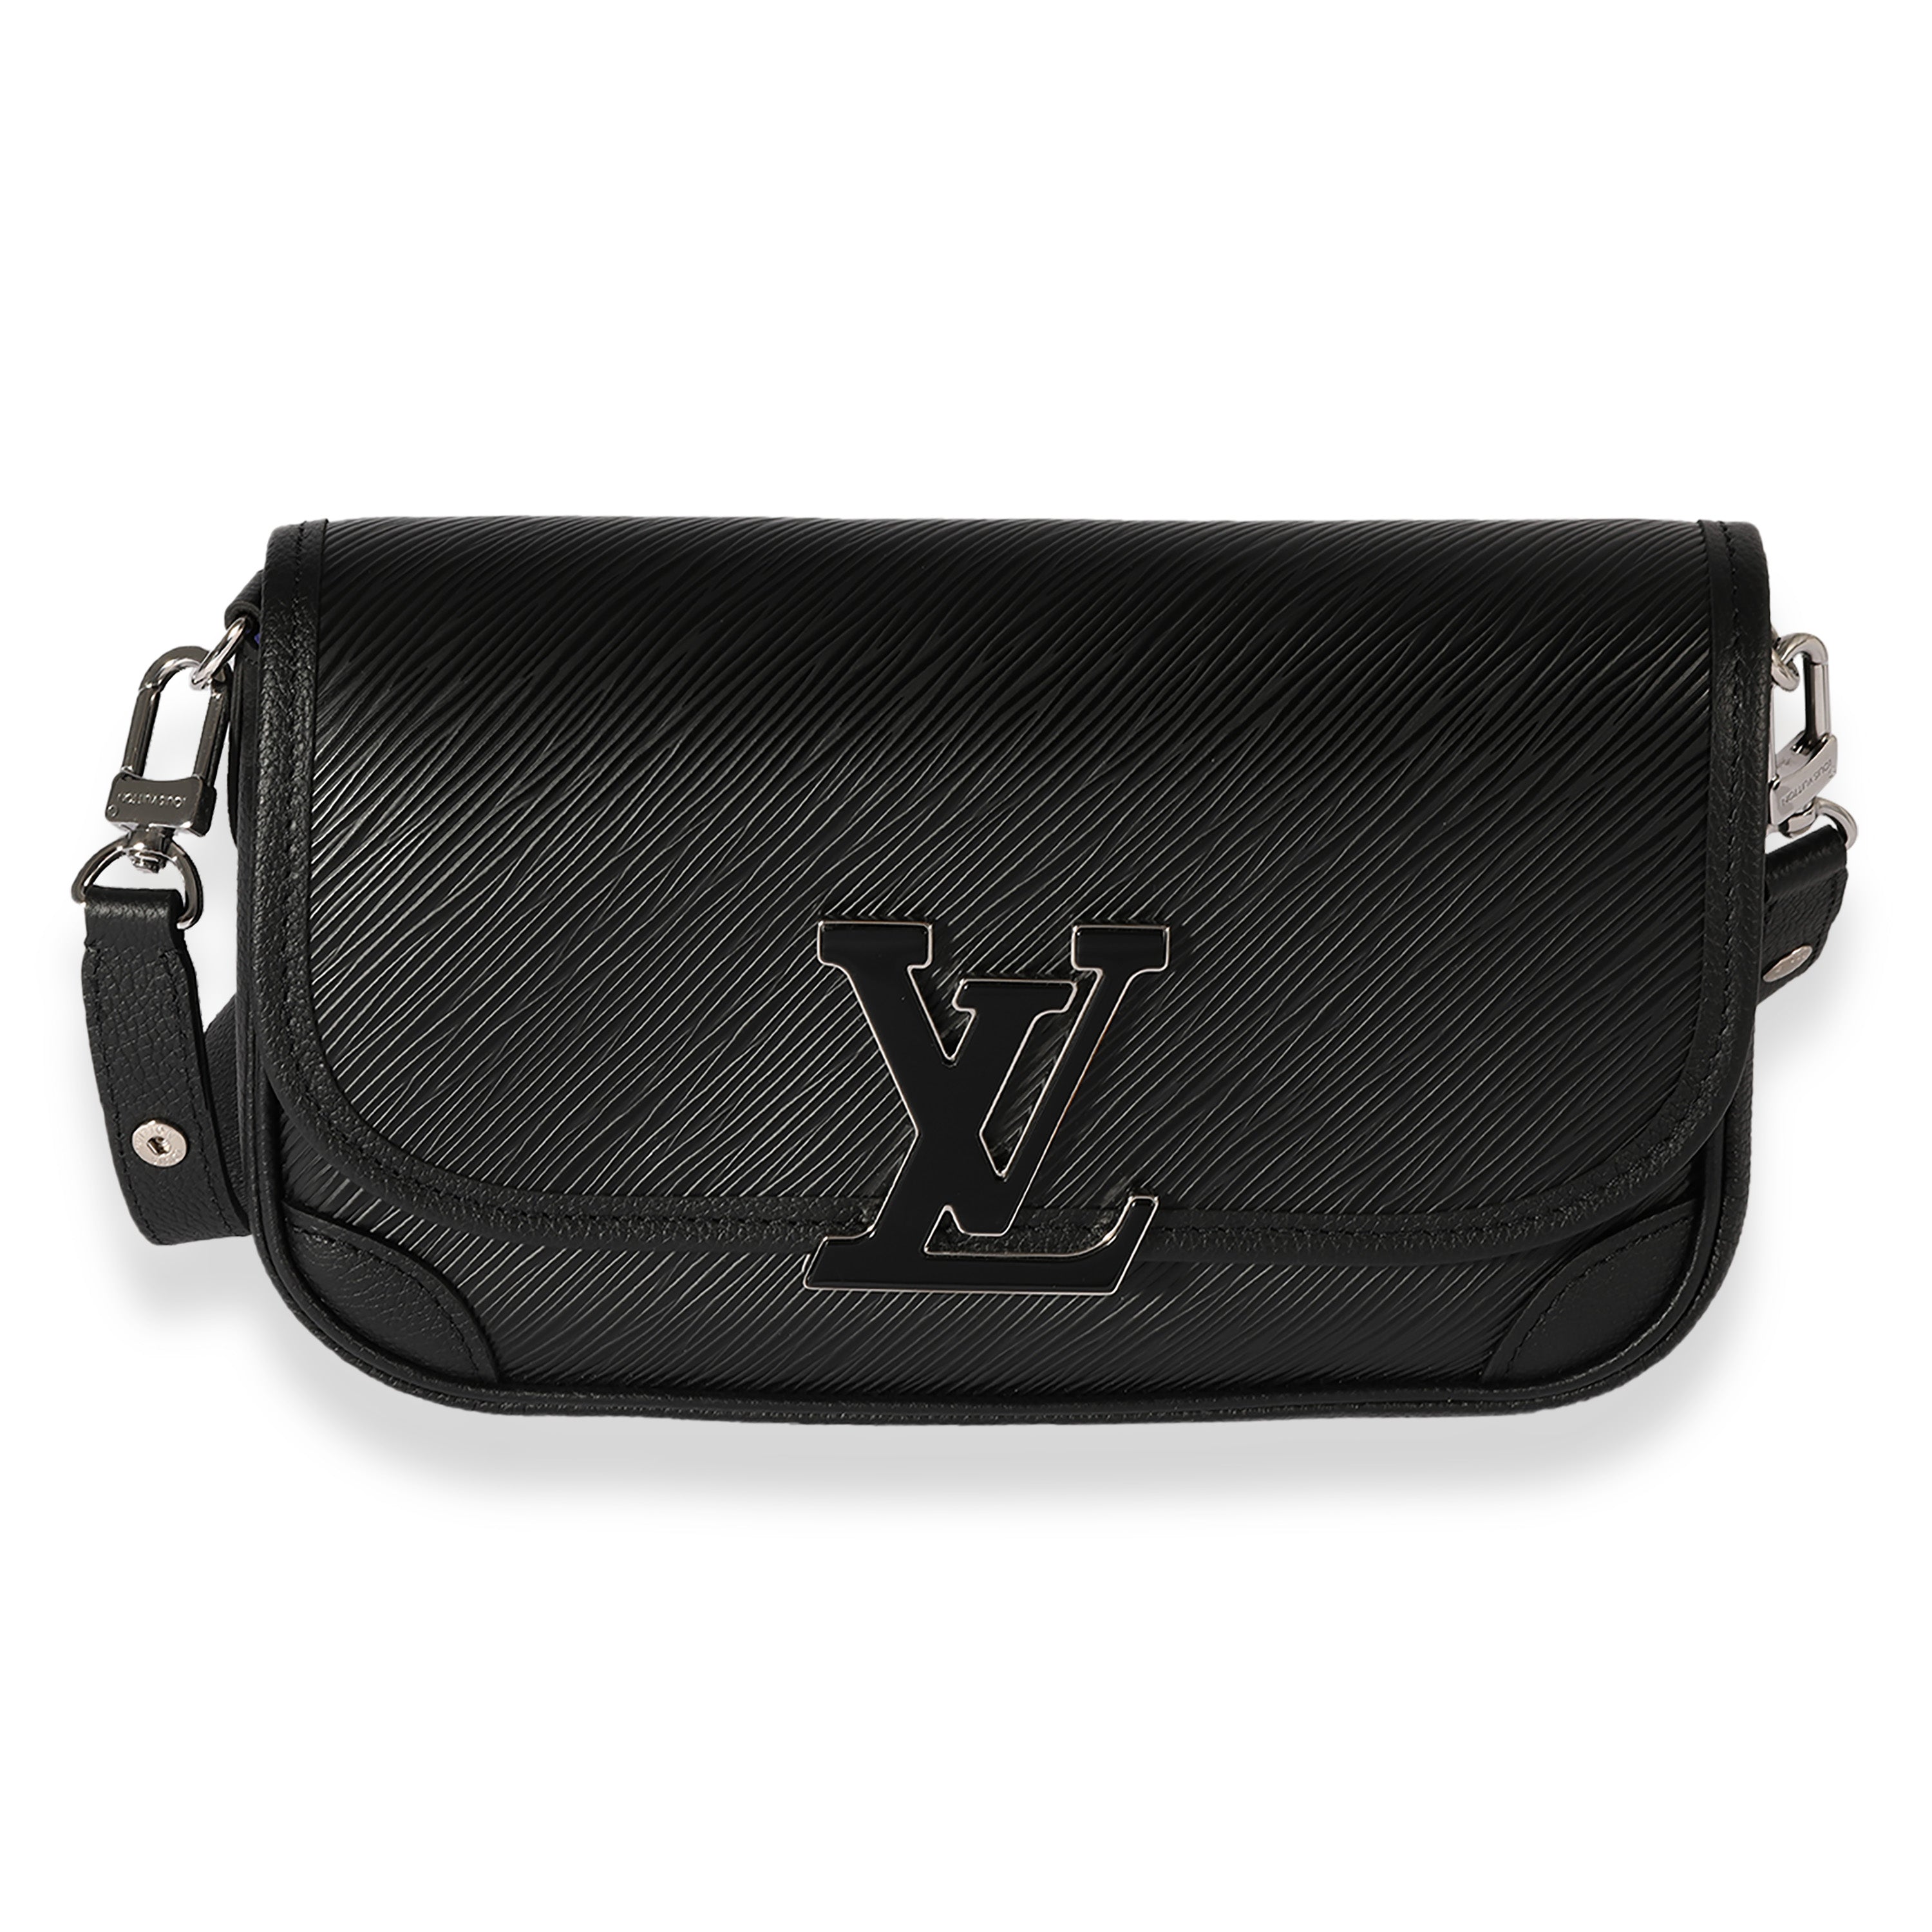 Louis Vuitton's Monogram Eclipse Is the New Black - Doctor Leather